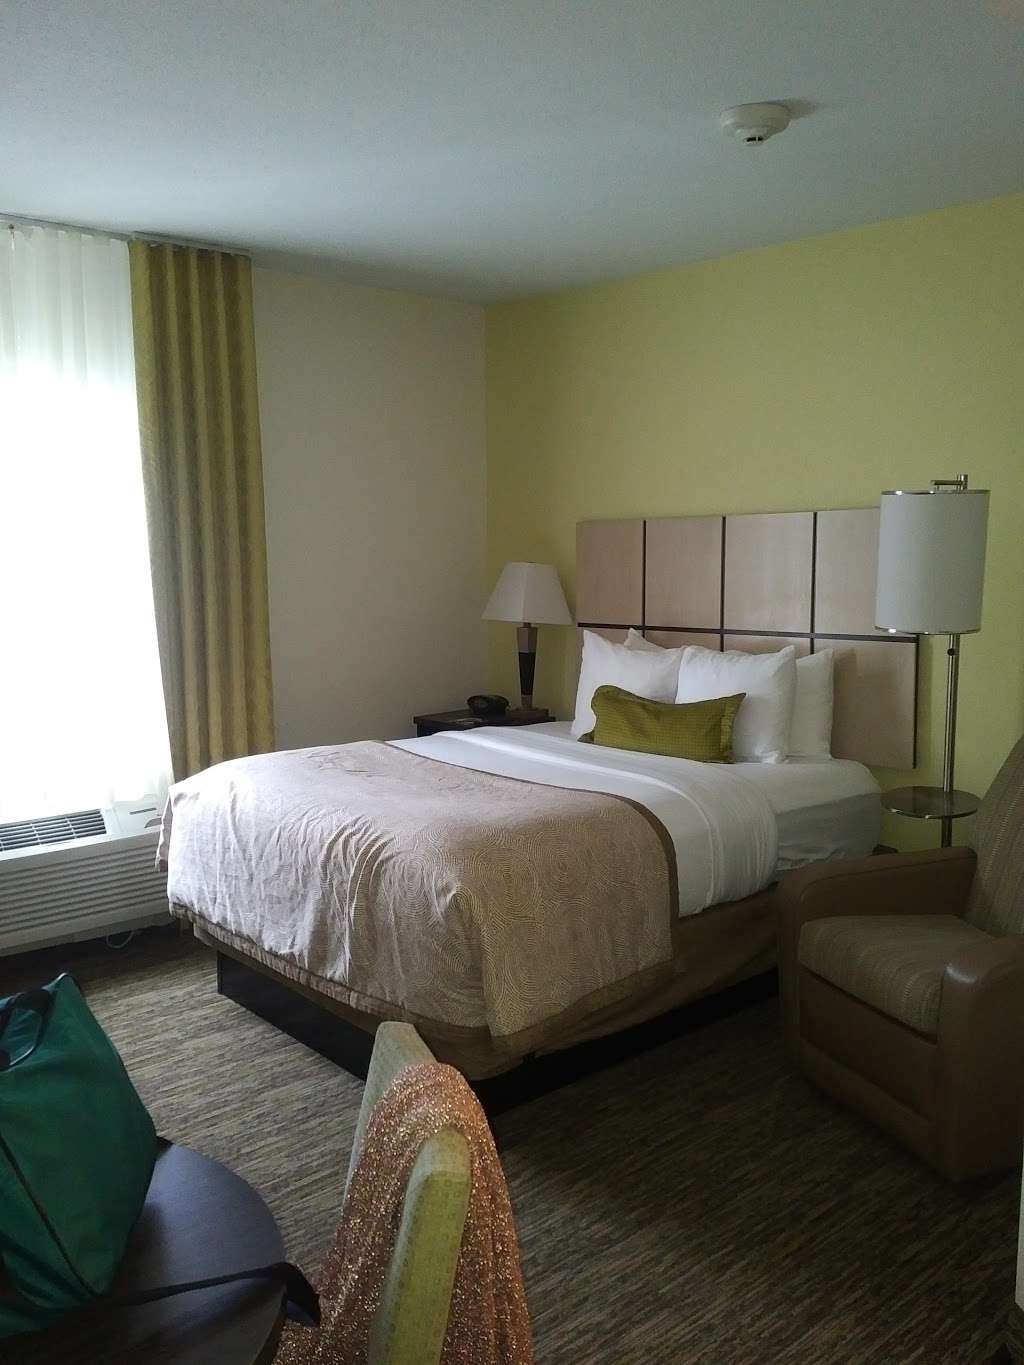 Candlewood Suites Arundel Mills / Bwi Airport | 1525 Dorsey Rd, Hanover, MD 21076, USA | Phone: (410) 691-0550